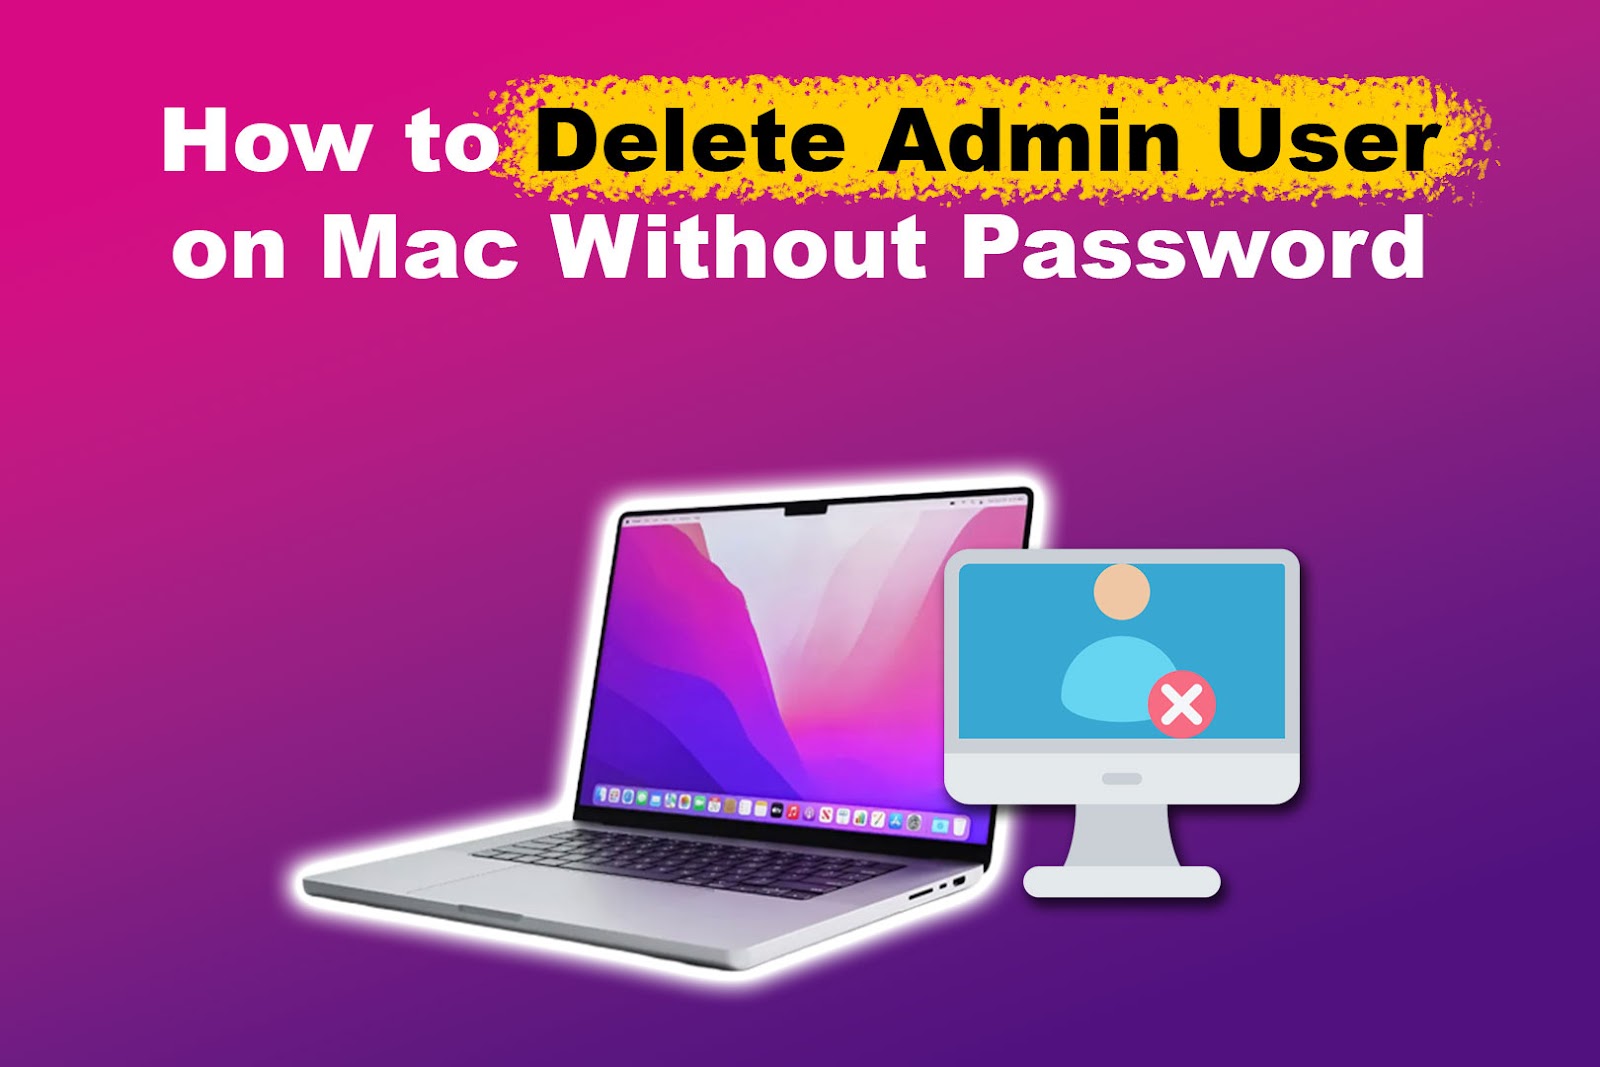 How to Delete Admin User on Mac Without Password